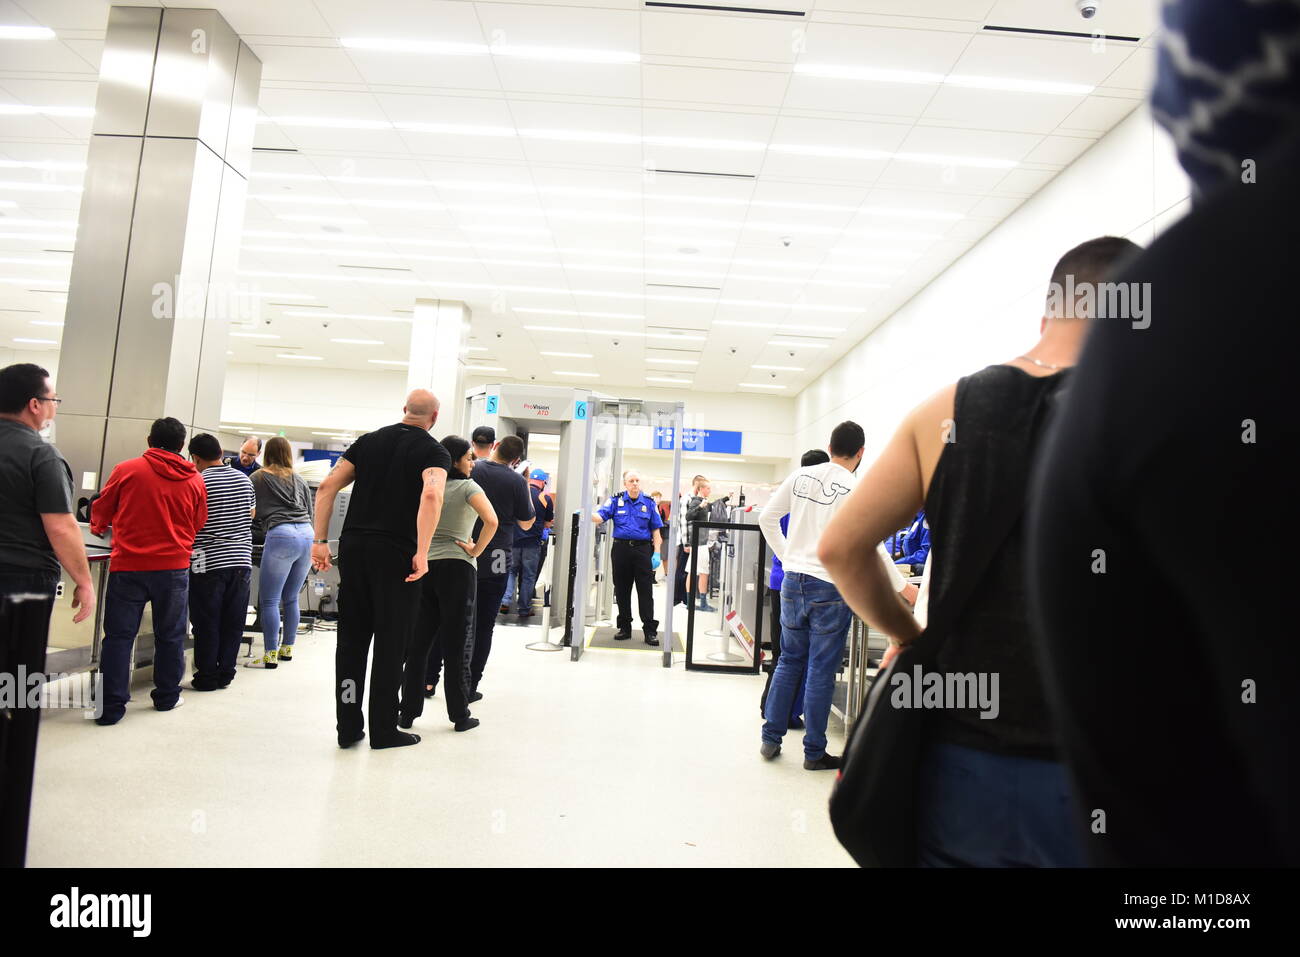 Fort-Lauderdale - JANUARY 22, 2018: Security and passport control at Fort-Lauderdale International Airport, Florida Stock Photo